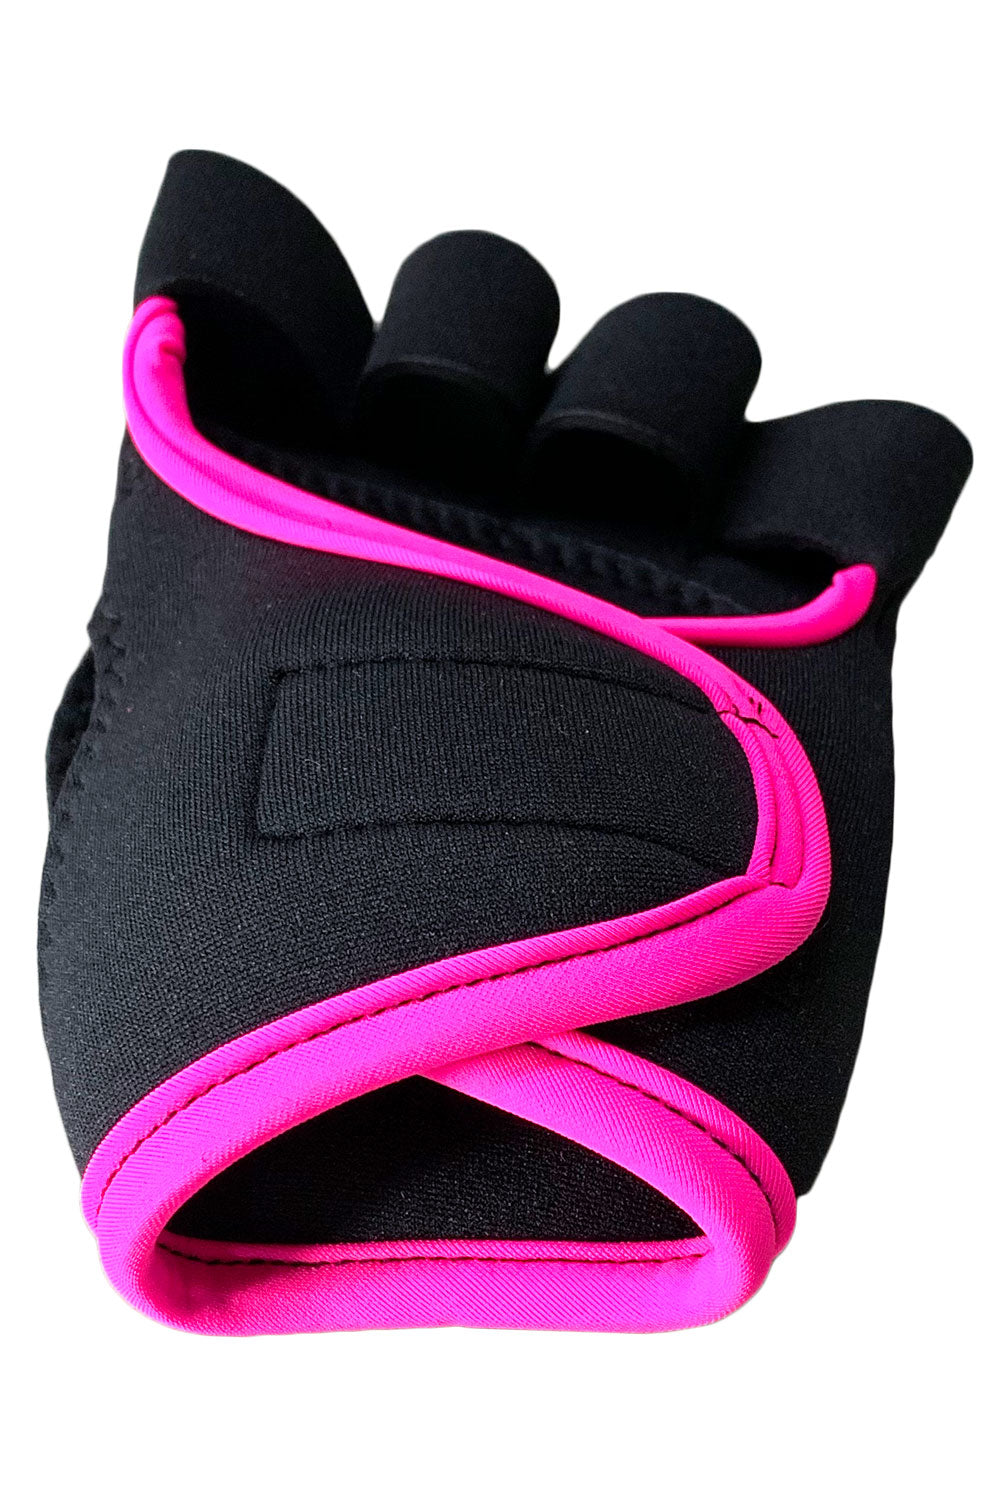 Women's Pink Piping Gloves 